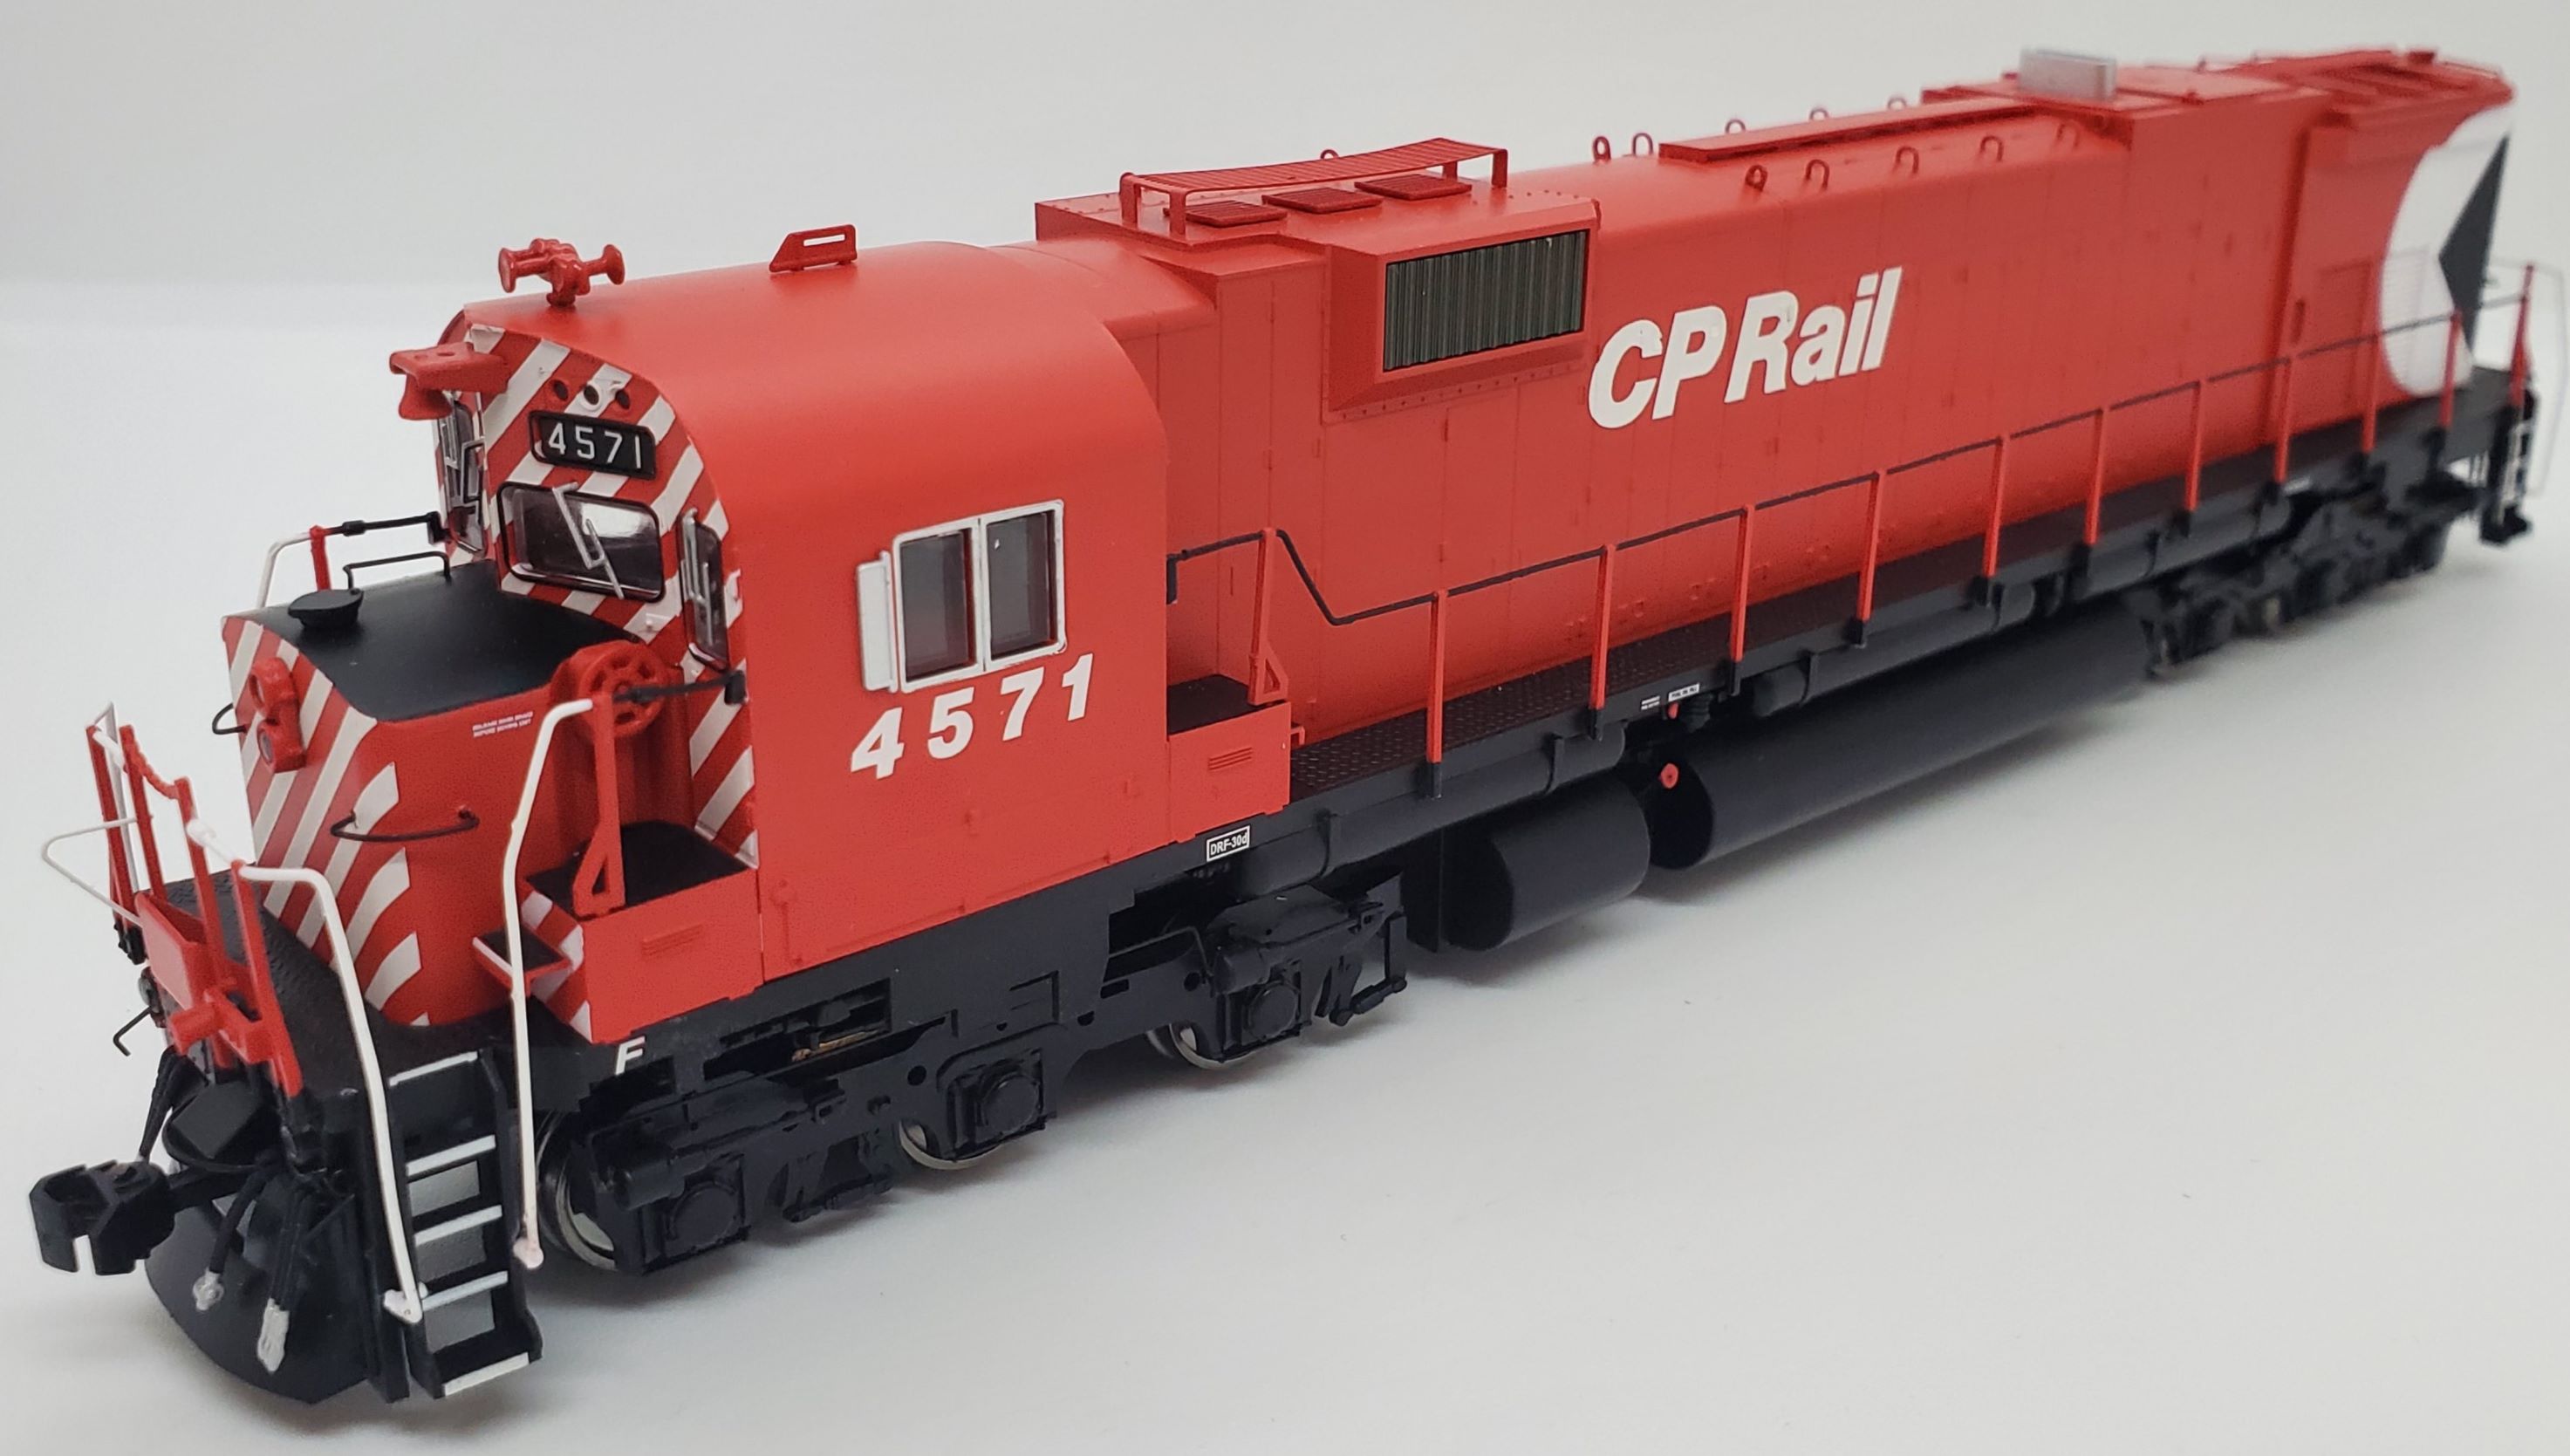 Bowser 24837 - HO MLW M630 - DC/DCC Ready - CP Rail (Multimark) #4571